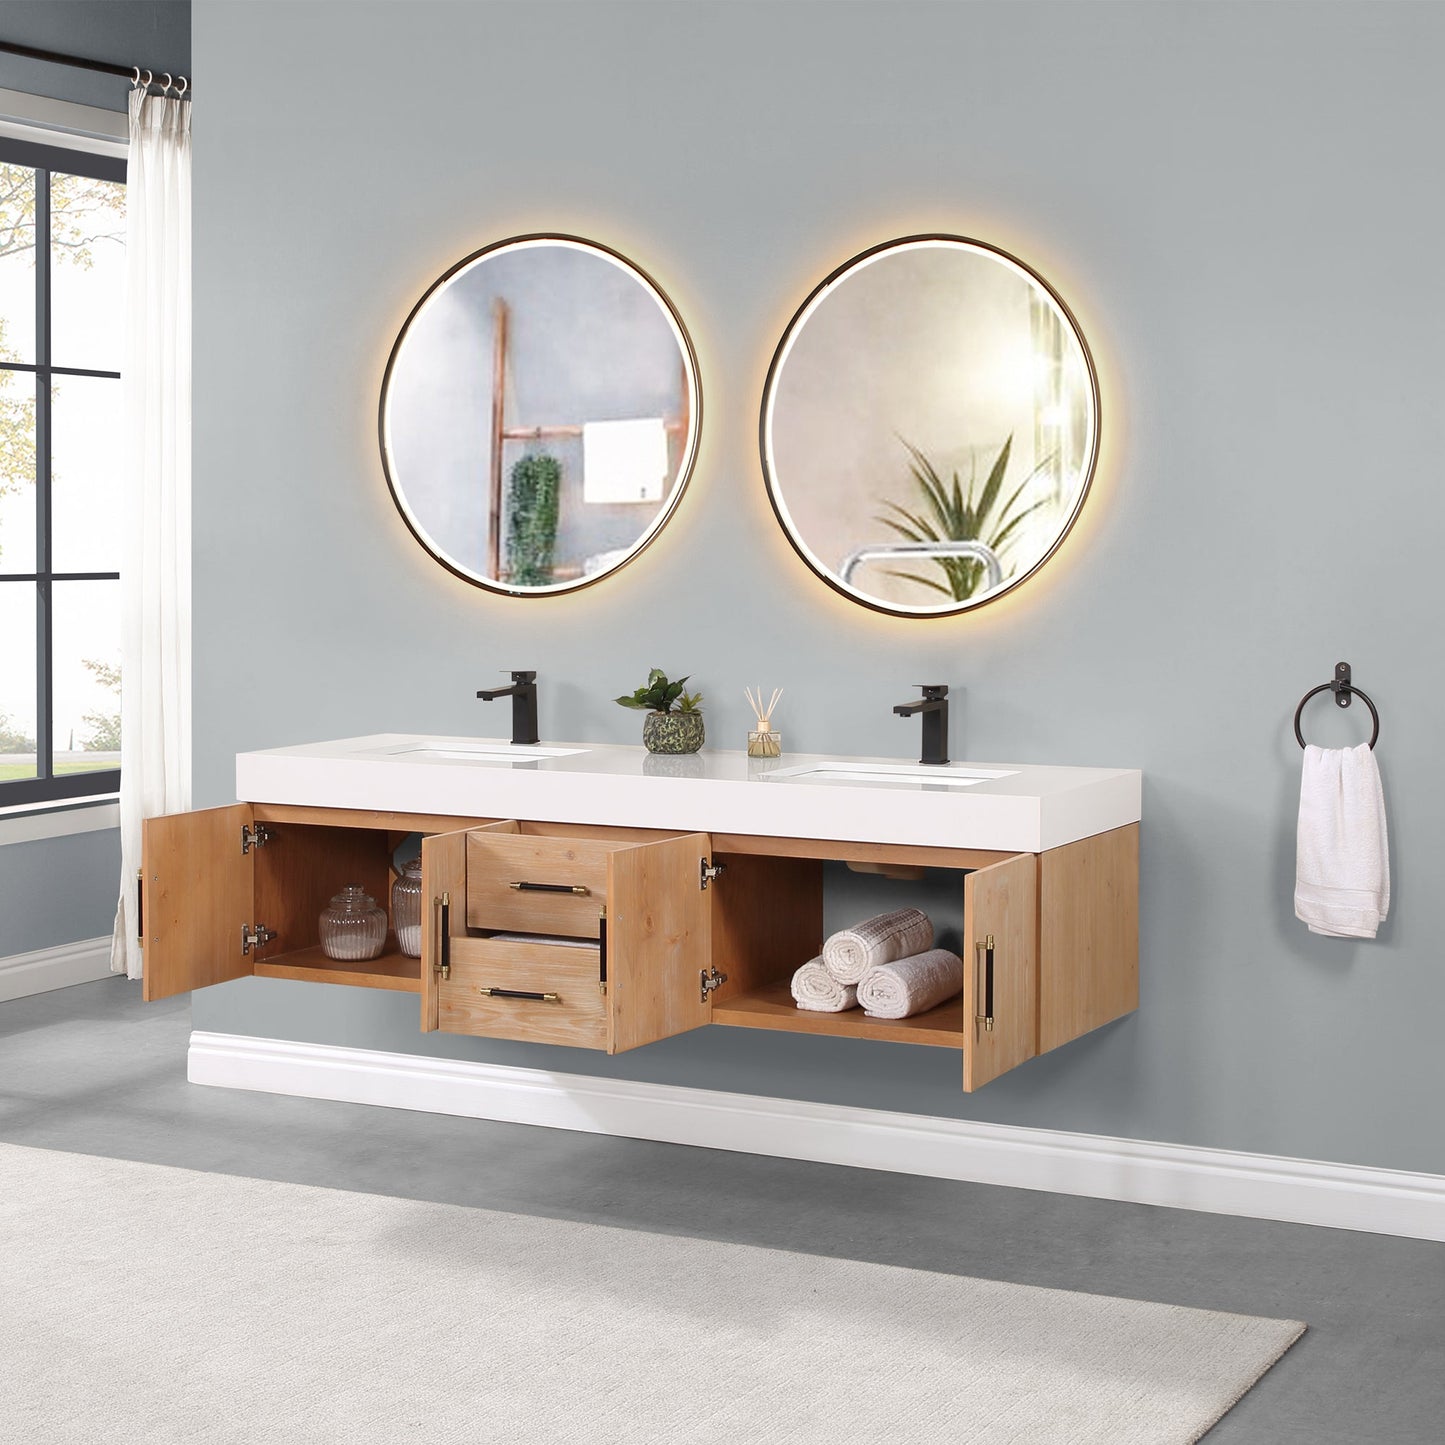 Corchia 72" Wall-mounted Double Bathroom Vanity in Light Brown with White Composite Stone Countertop with Mirror